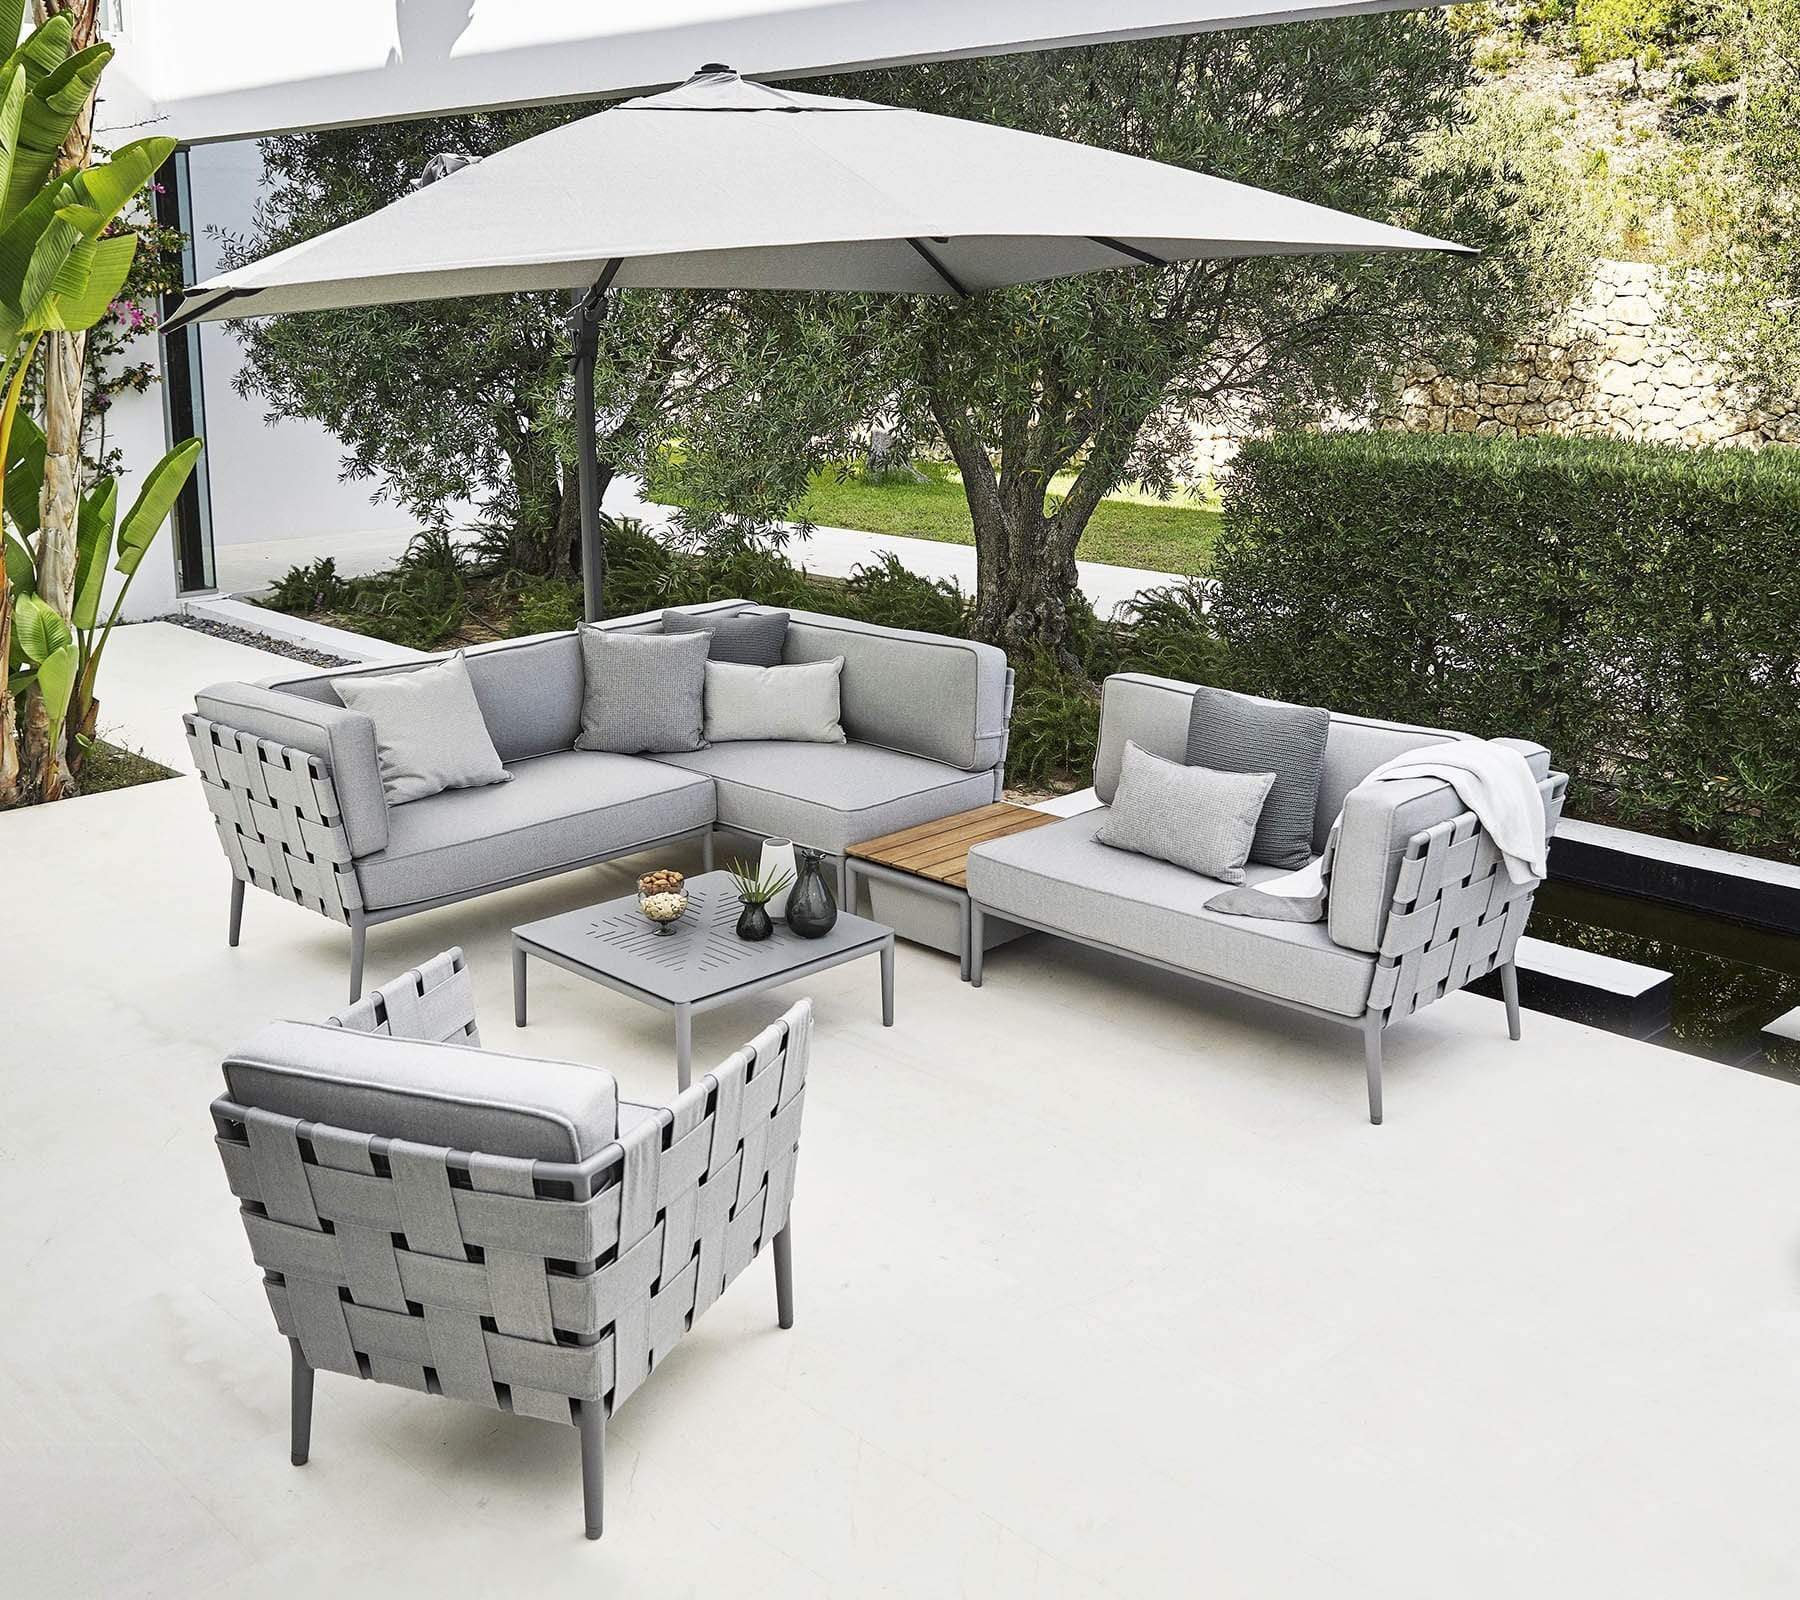 Boxhill's Conic Box Outdoor Storage Table lifestyle image in between Conic Module Sofa Light Grey with big umbrella sunshade at patio